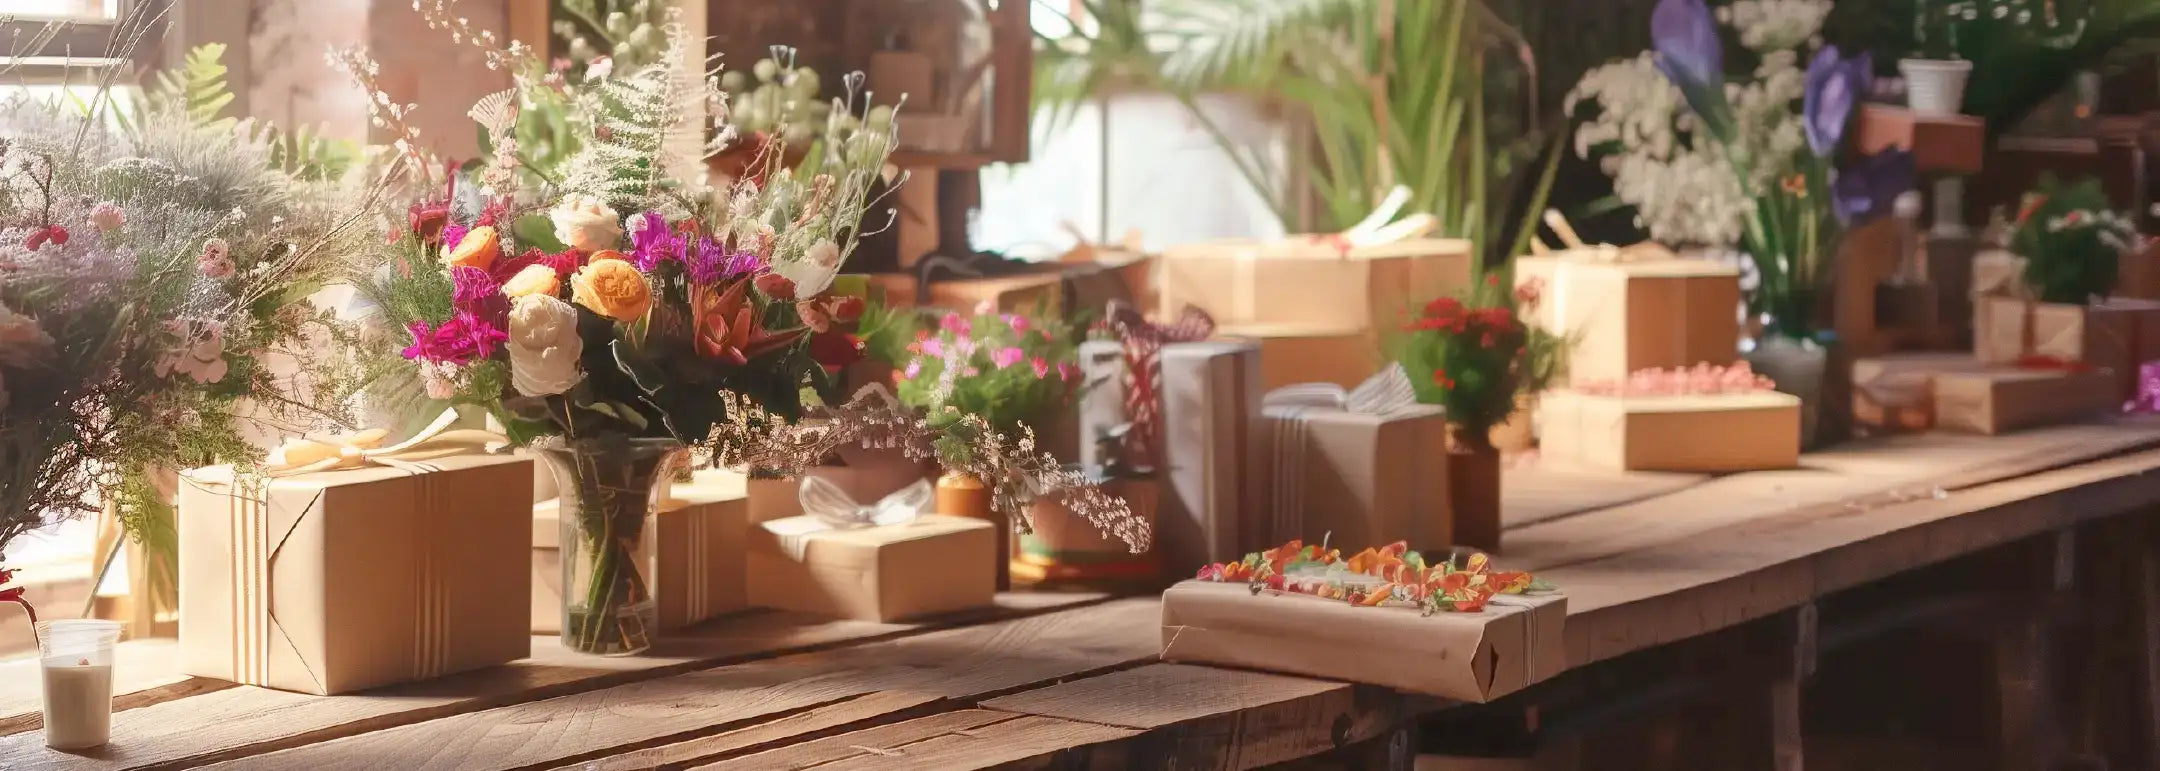 A beautifully arranged display of corporate gifting options featuring vibrant flower bouquets, neatly wrapped gift boxes, and greenery, set on a wooden table in a warmly lit room. Fabulous Flowers and Gifts.